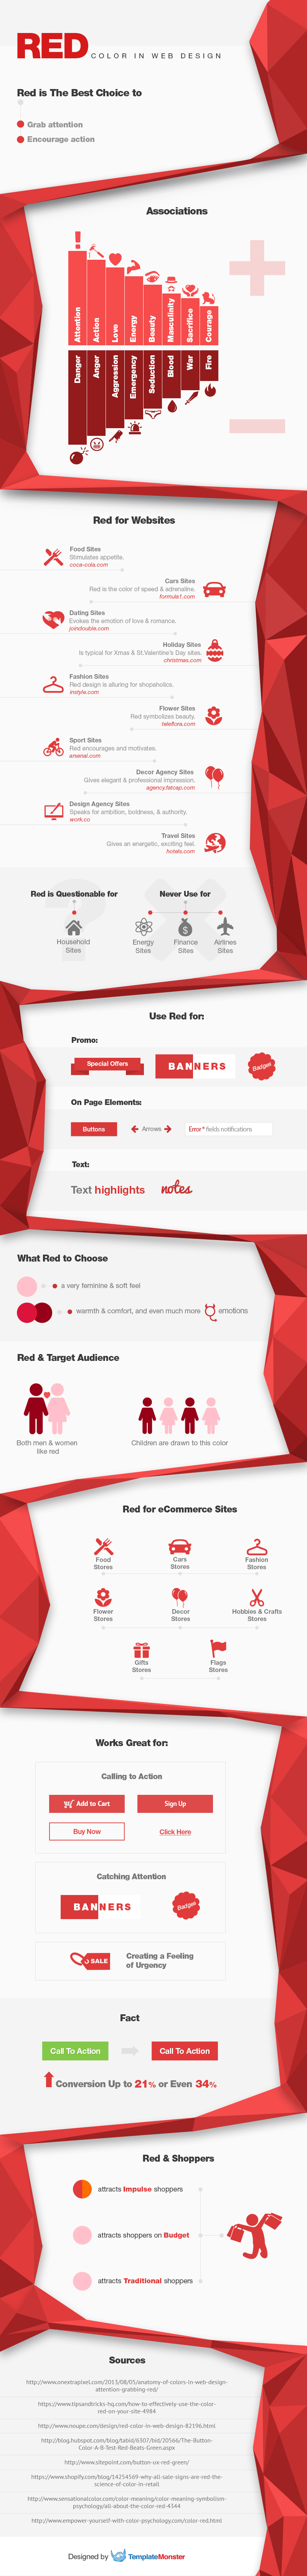 red color psychology infographic